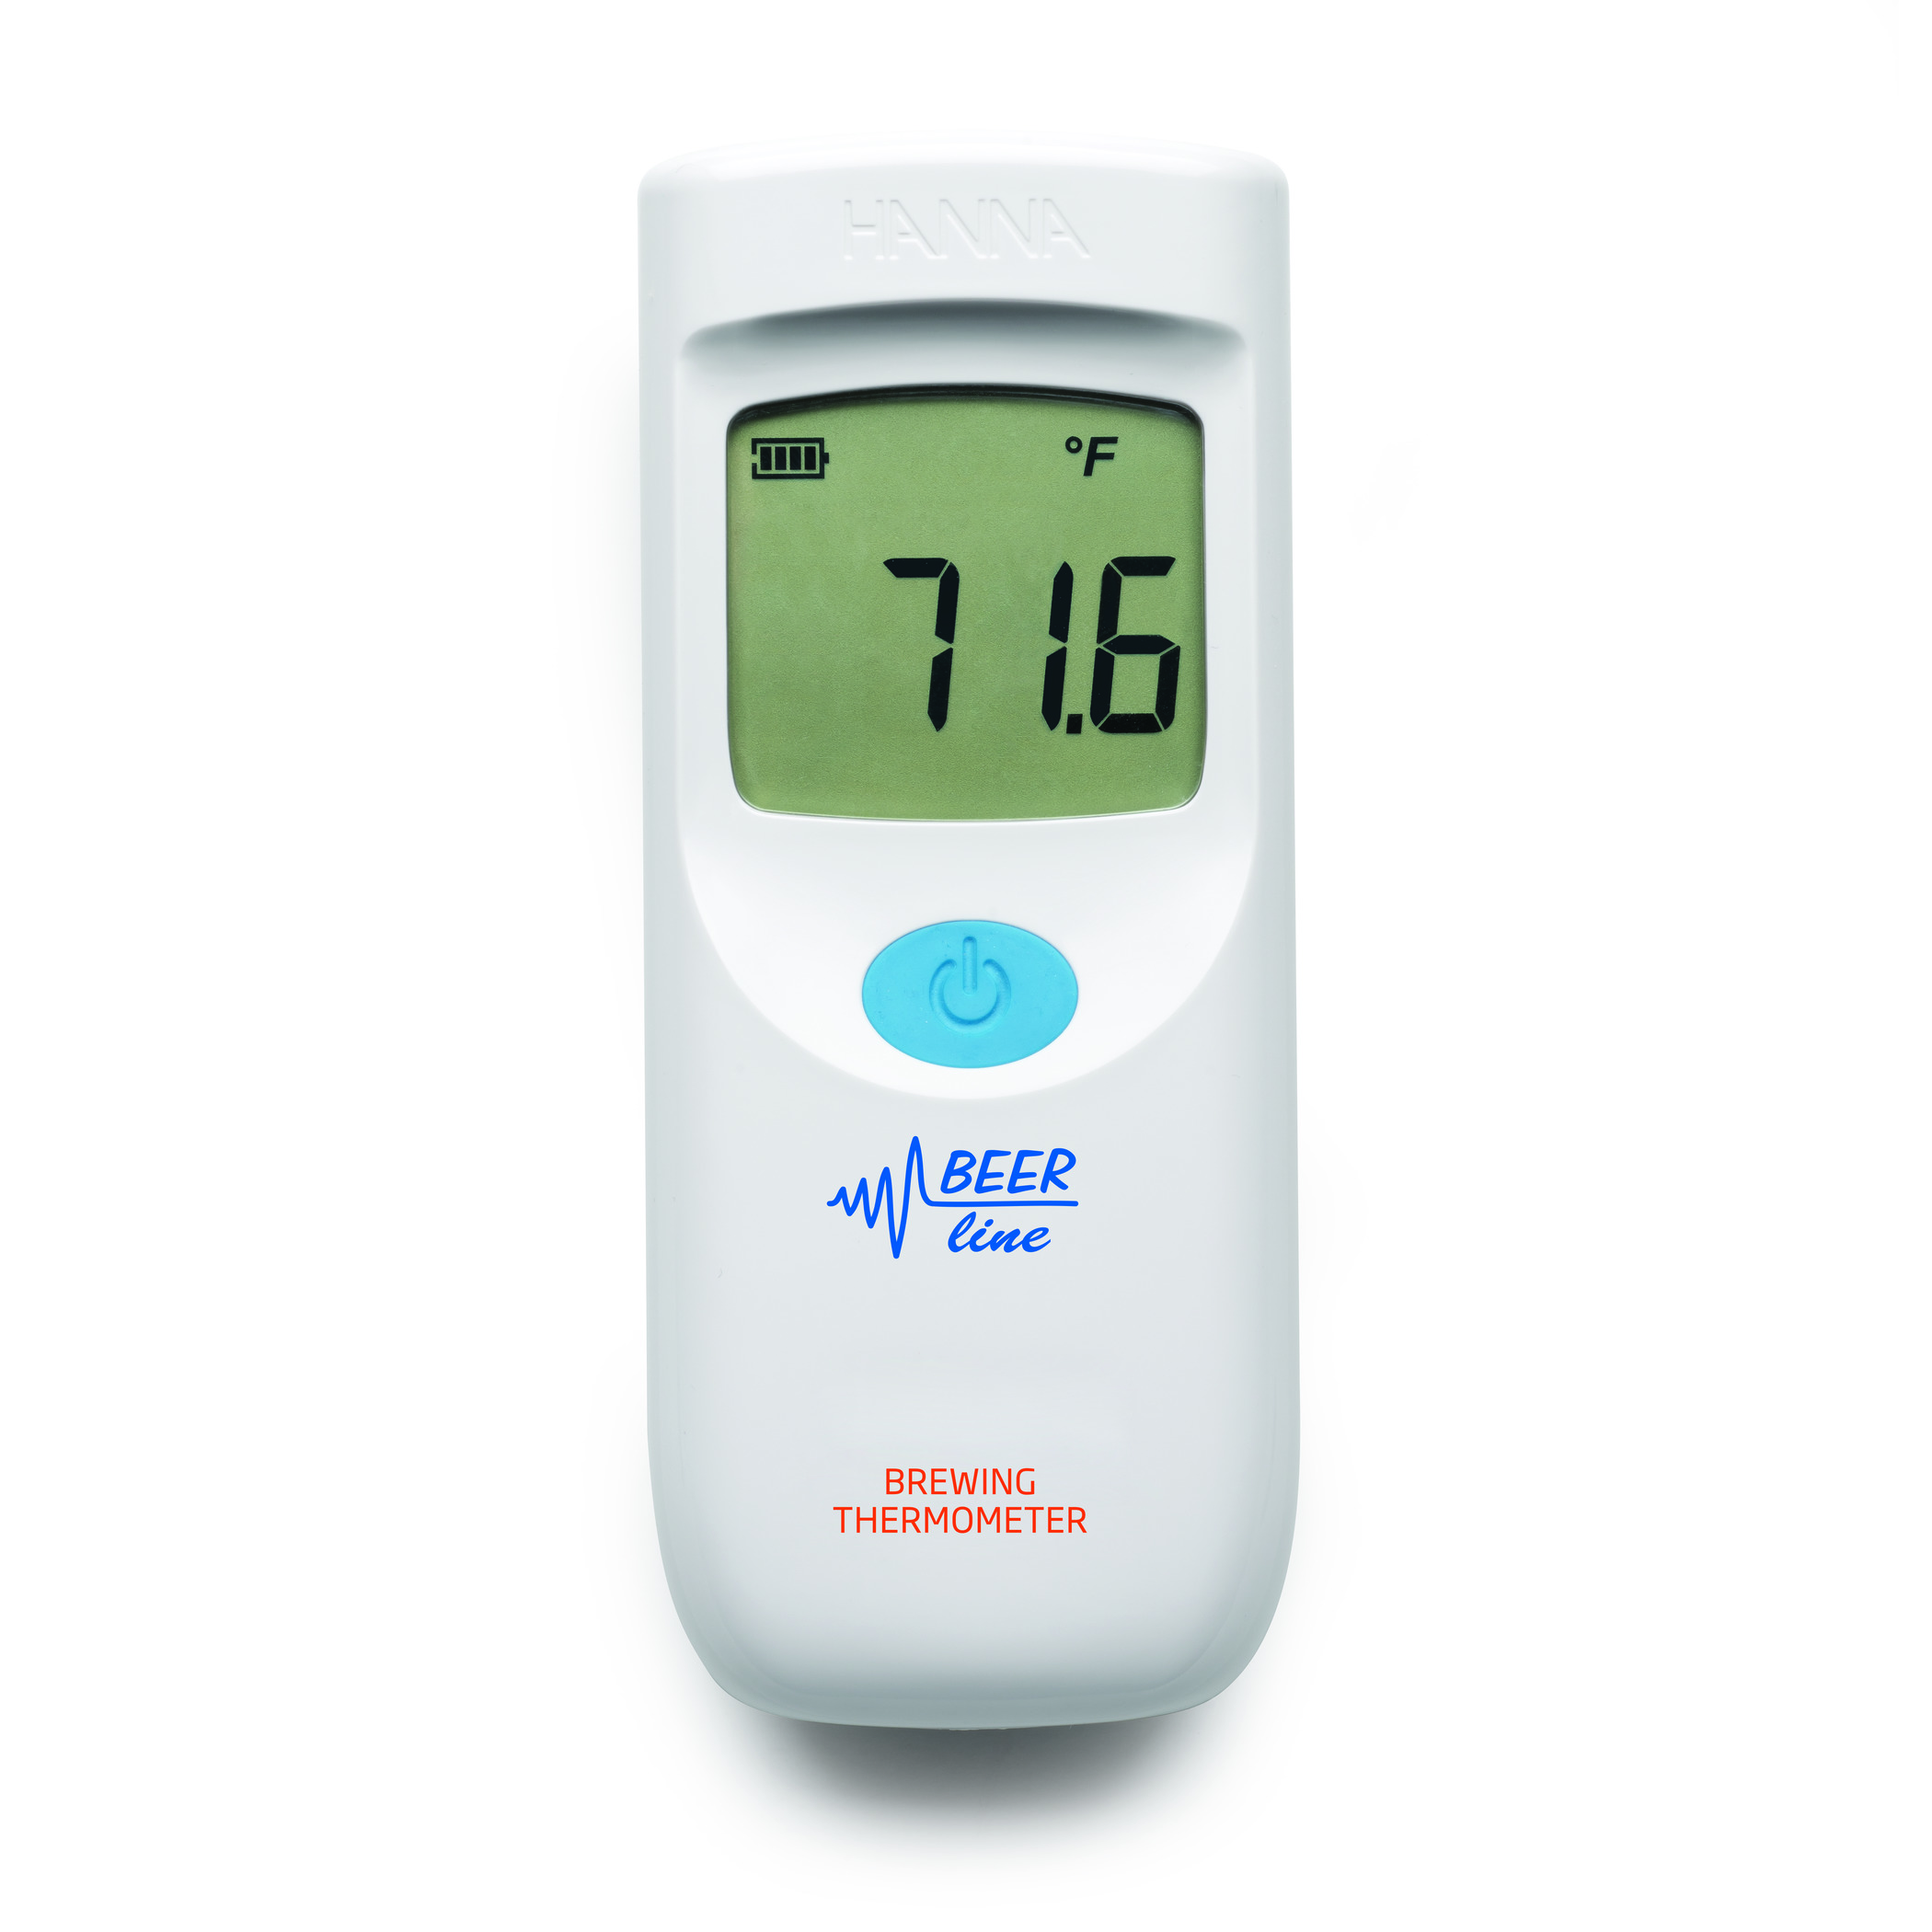  HI935012 brewing thermometer